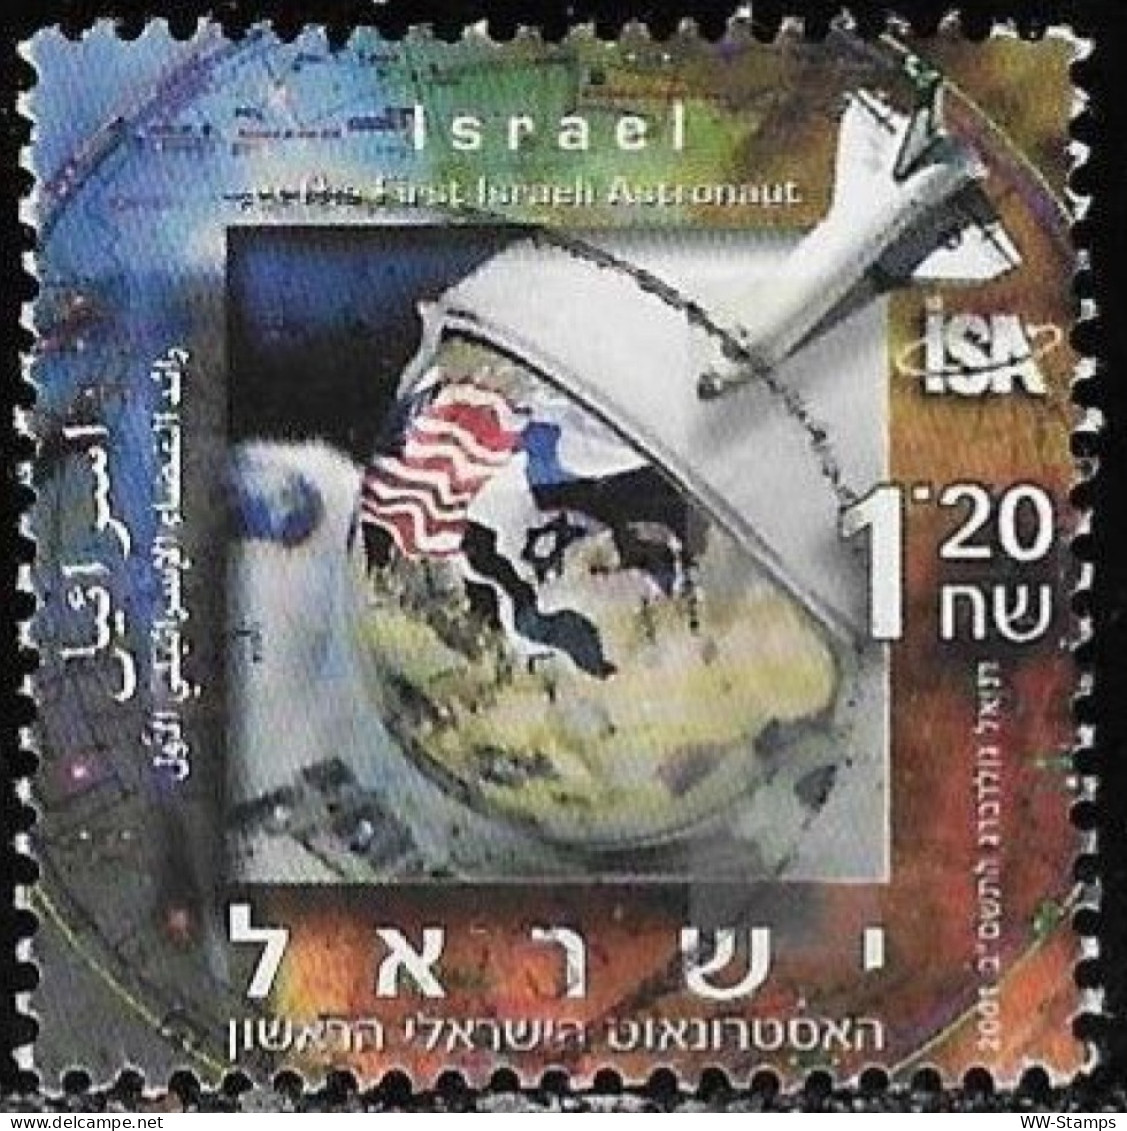 Israel 2001 Used Stamp The First Israeli Space Astronaut [INLT11] - Gebraucht (ohne Tabs)